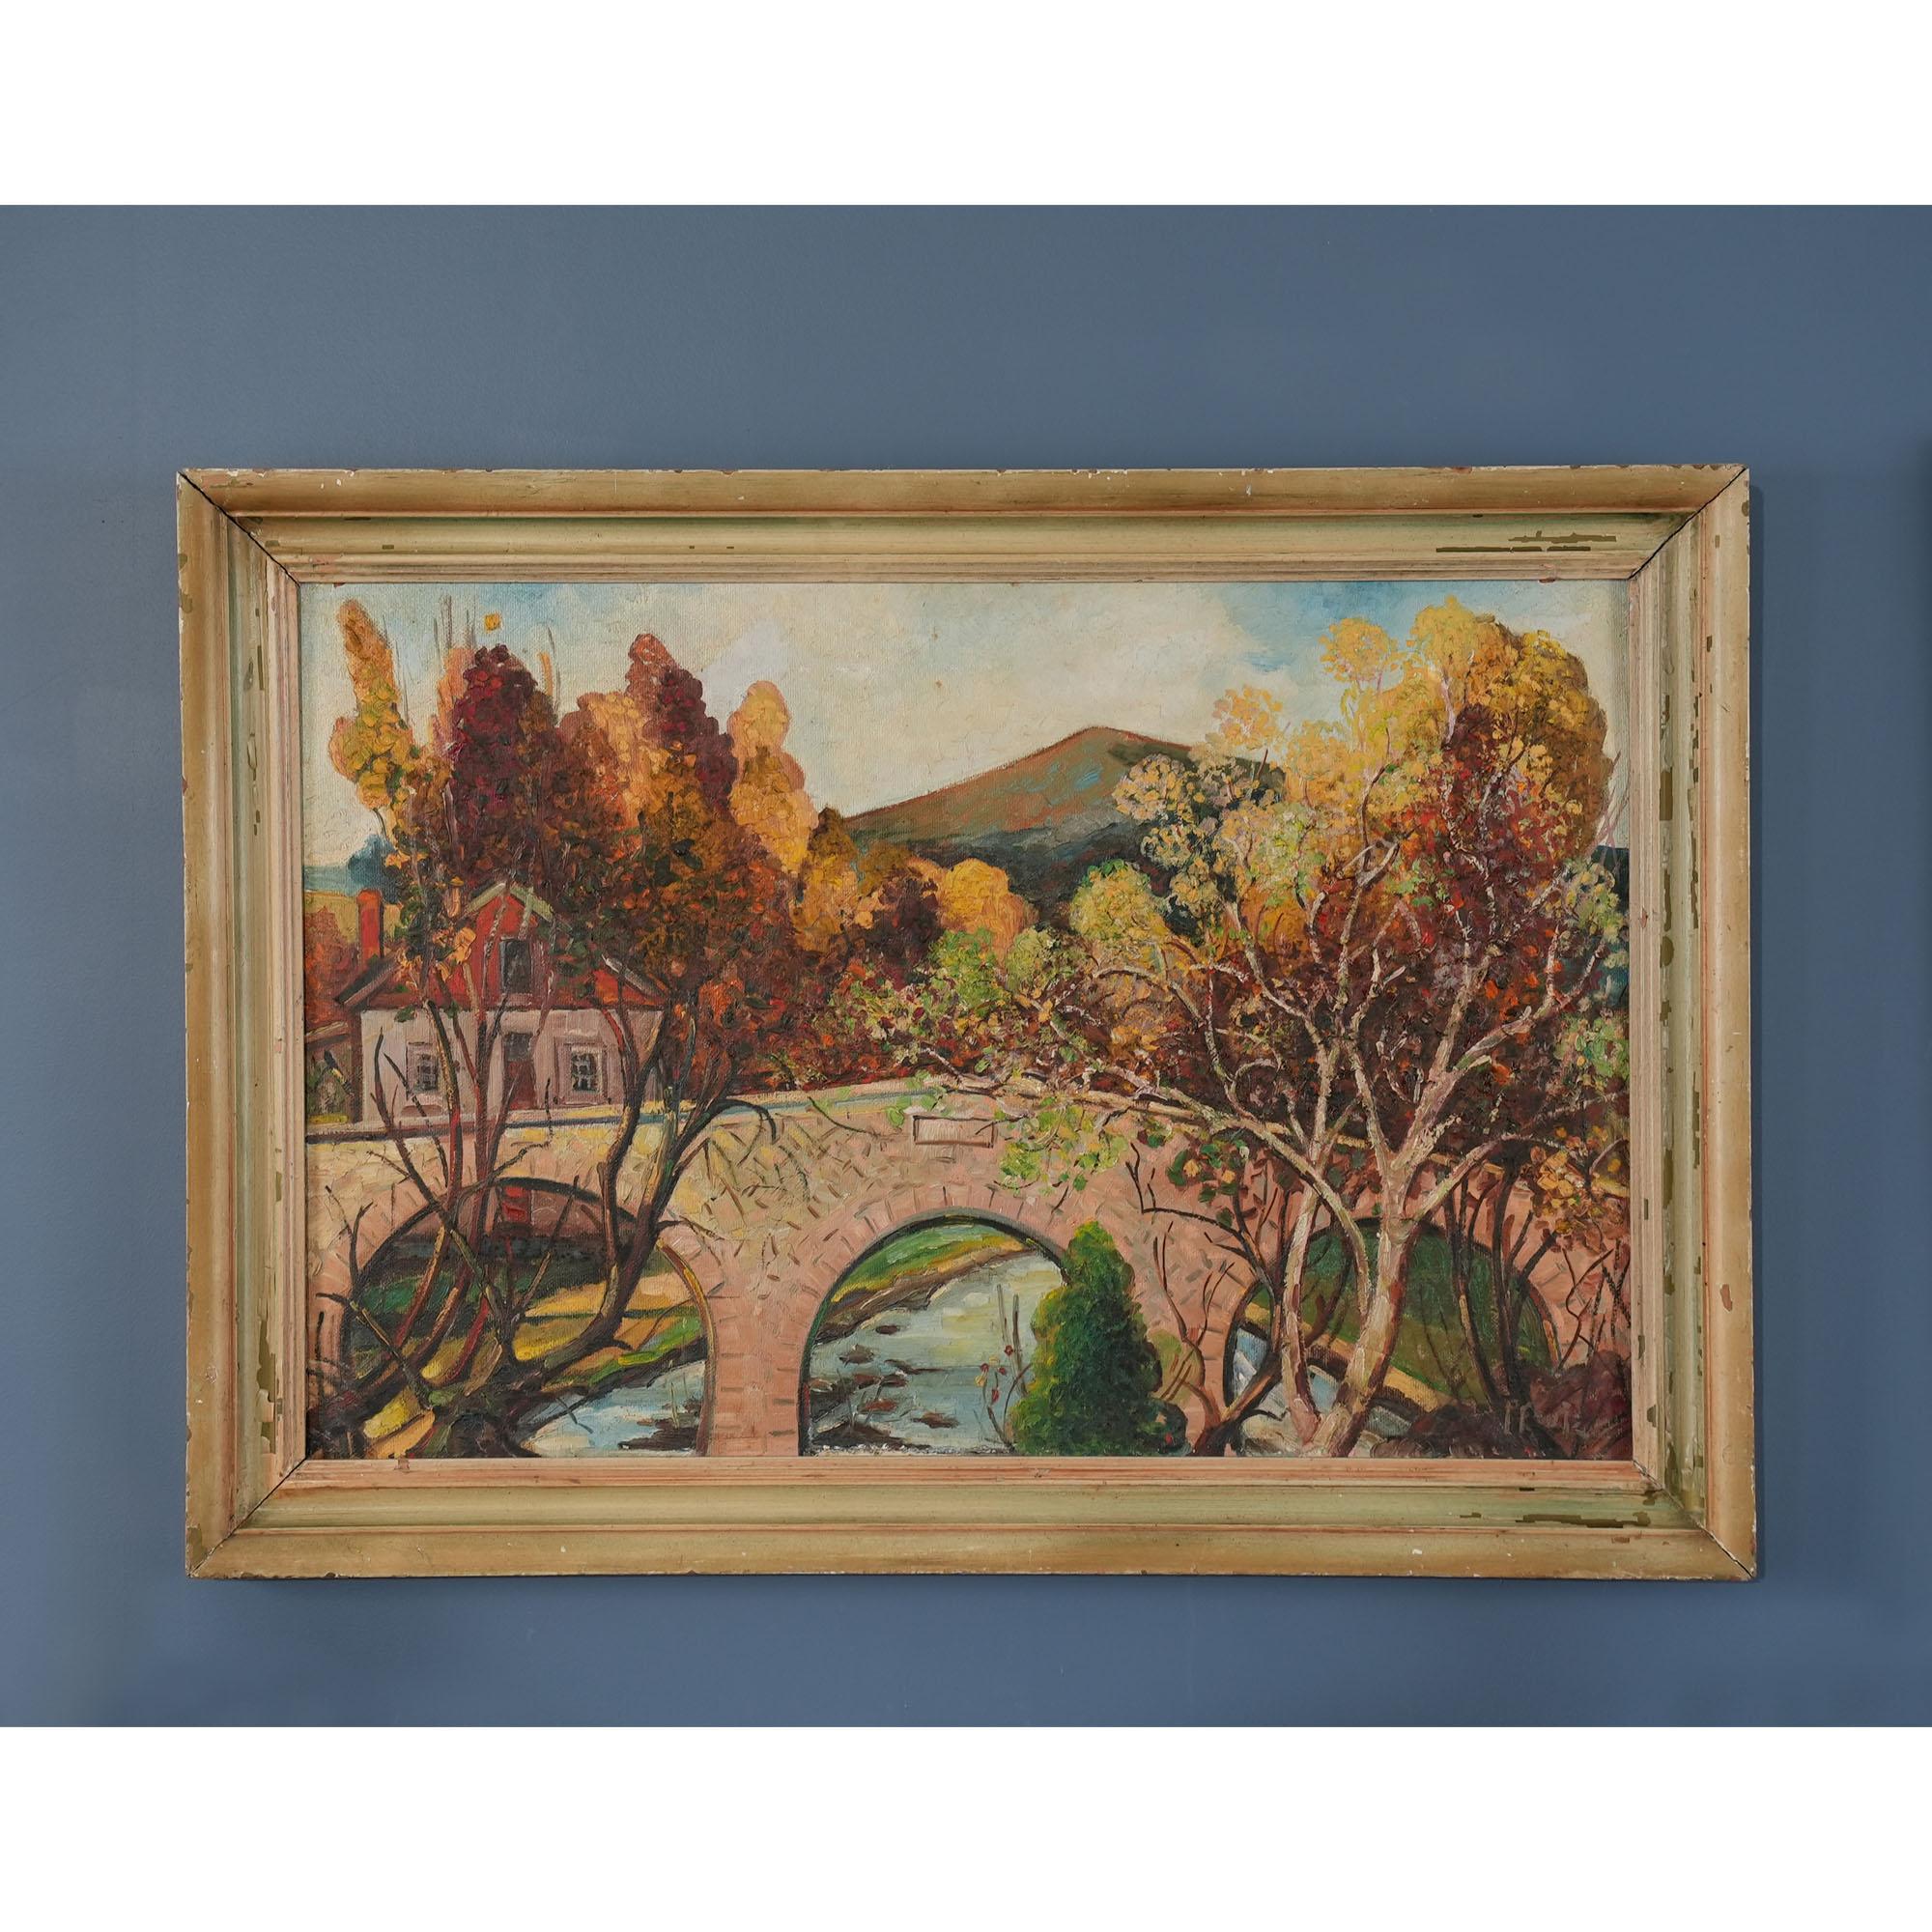 A very interesting and unusual Lancaster Bridge Original Oil Painting by artist J. Earle Pfoutz. The painting is produced on artist board and comes complete with what appears to be an original artist decorated/painted frame. The painting is signed